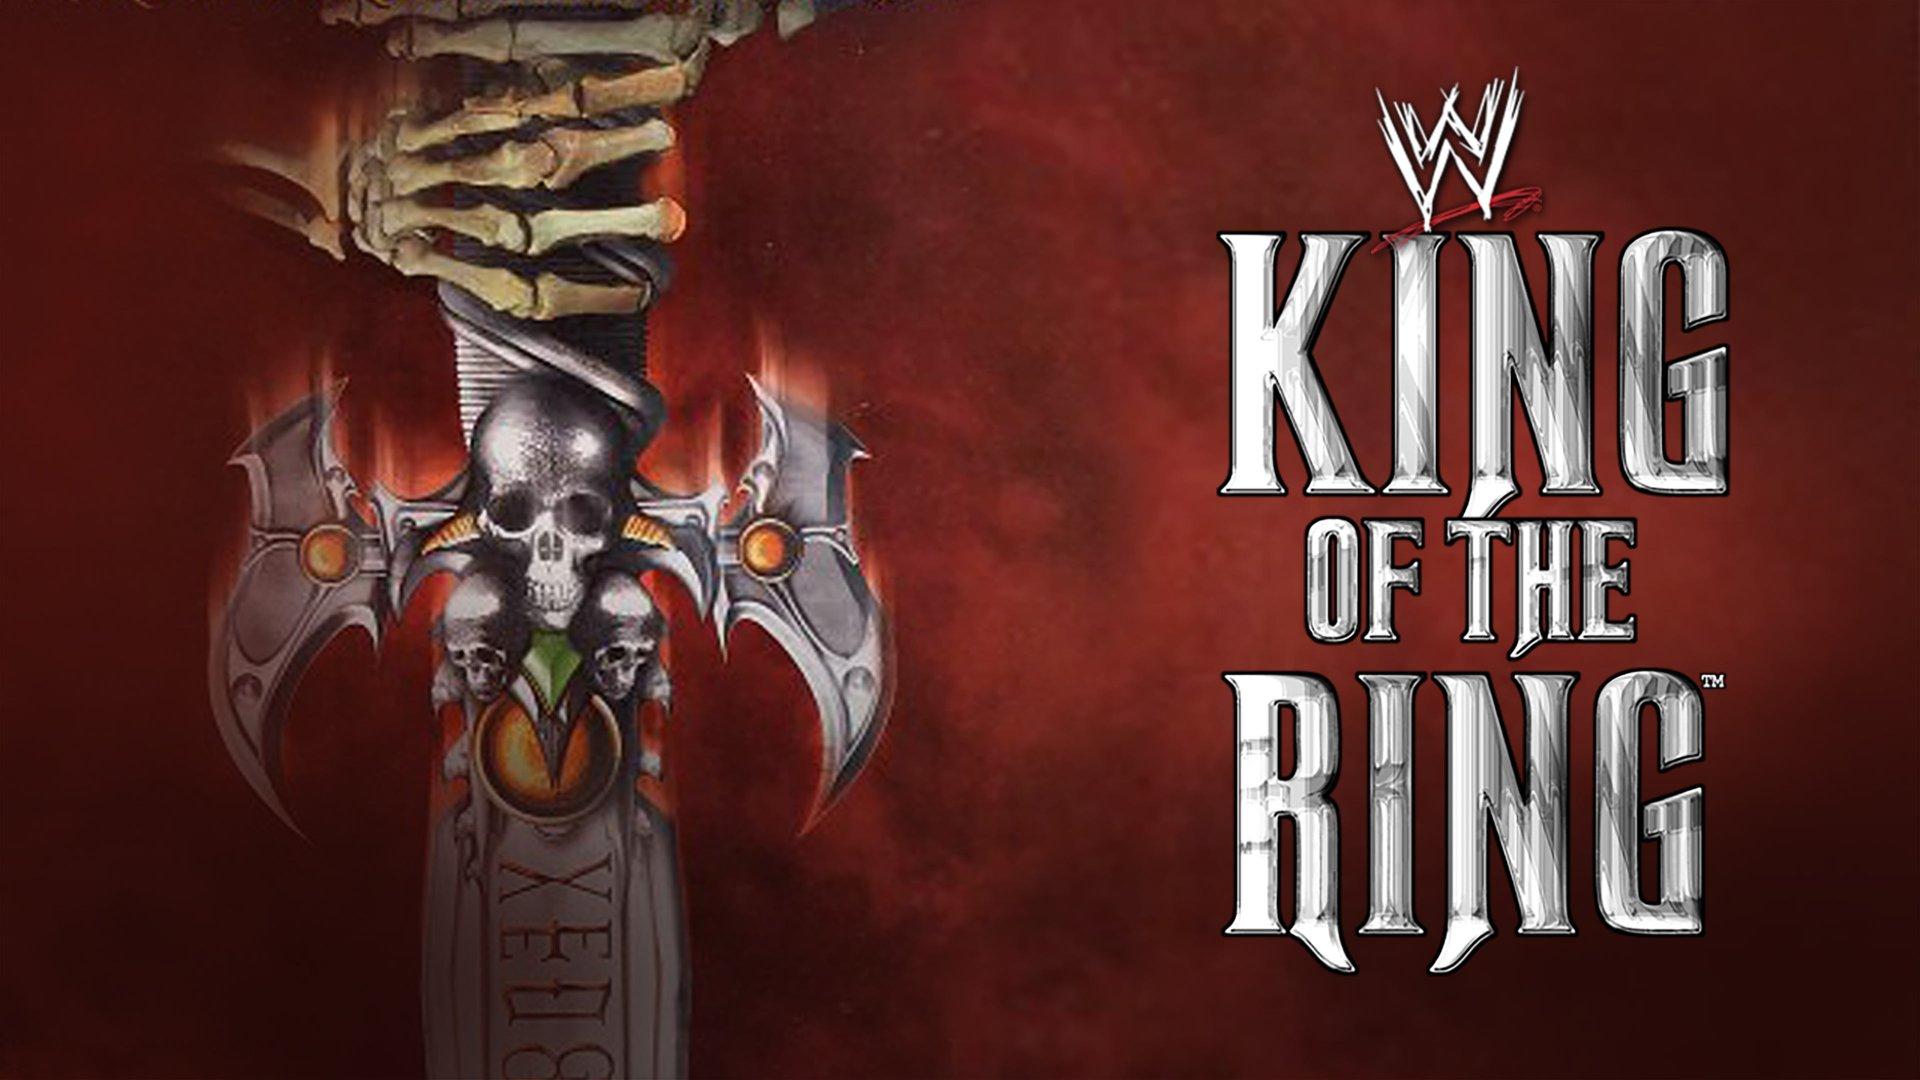 WWF King of the Ring 2000